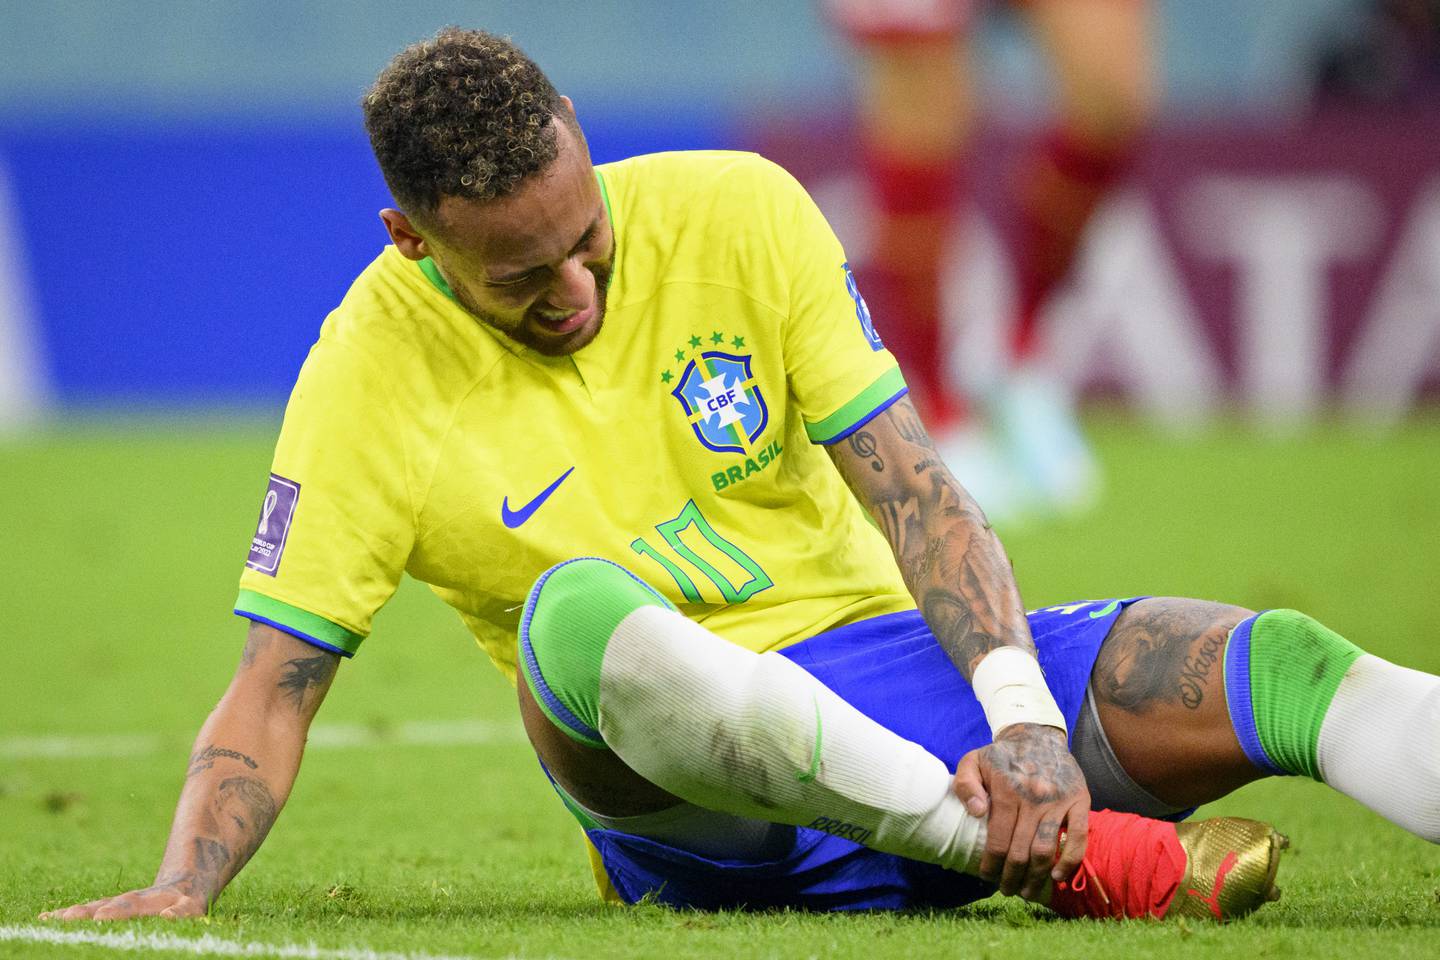 Brazil's Neymar grabs after suffering an injury during the World Cup Group G soccer match between Brazil and Serbia at the Lusail Stadium in Lusail, Qatar on Thursday November 24, 2022. (Laurent Gillieron/Keystone via AP)